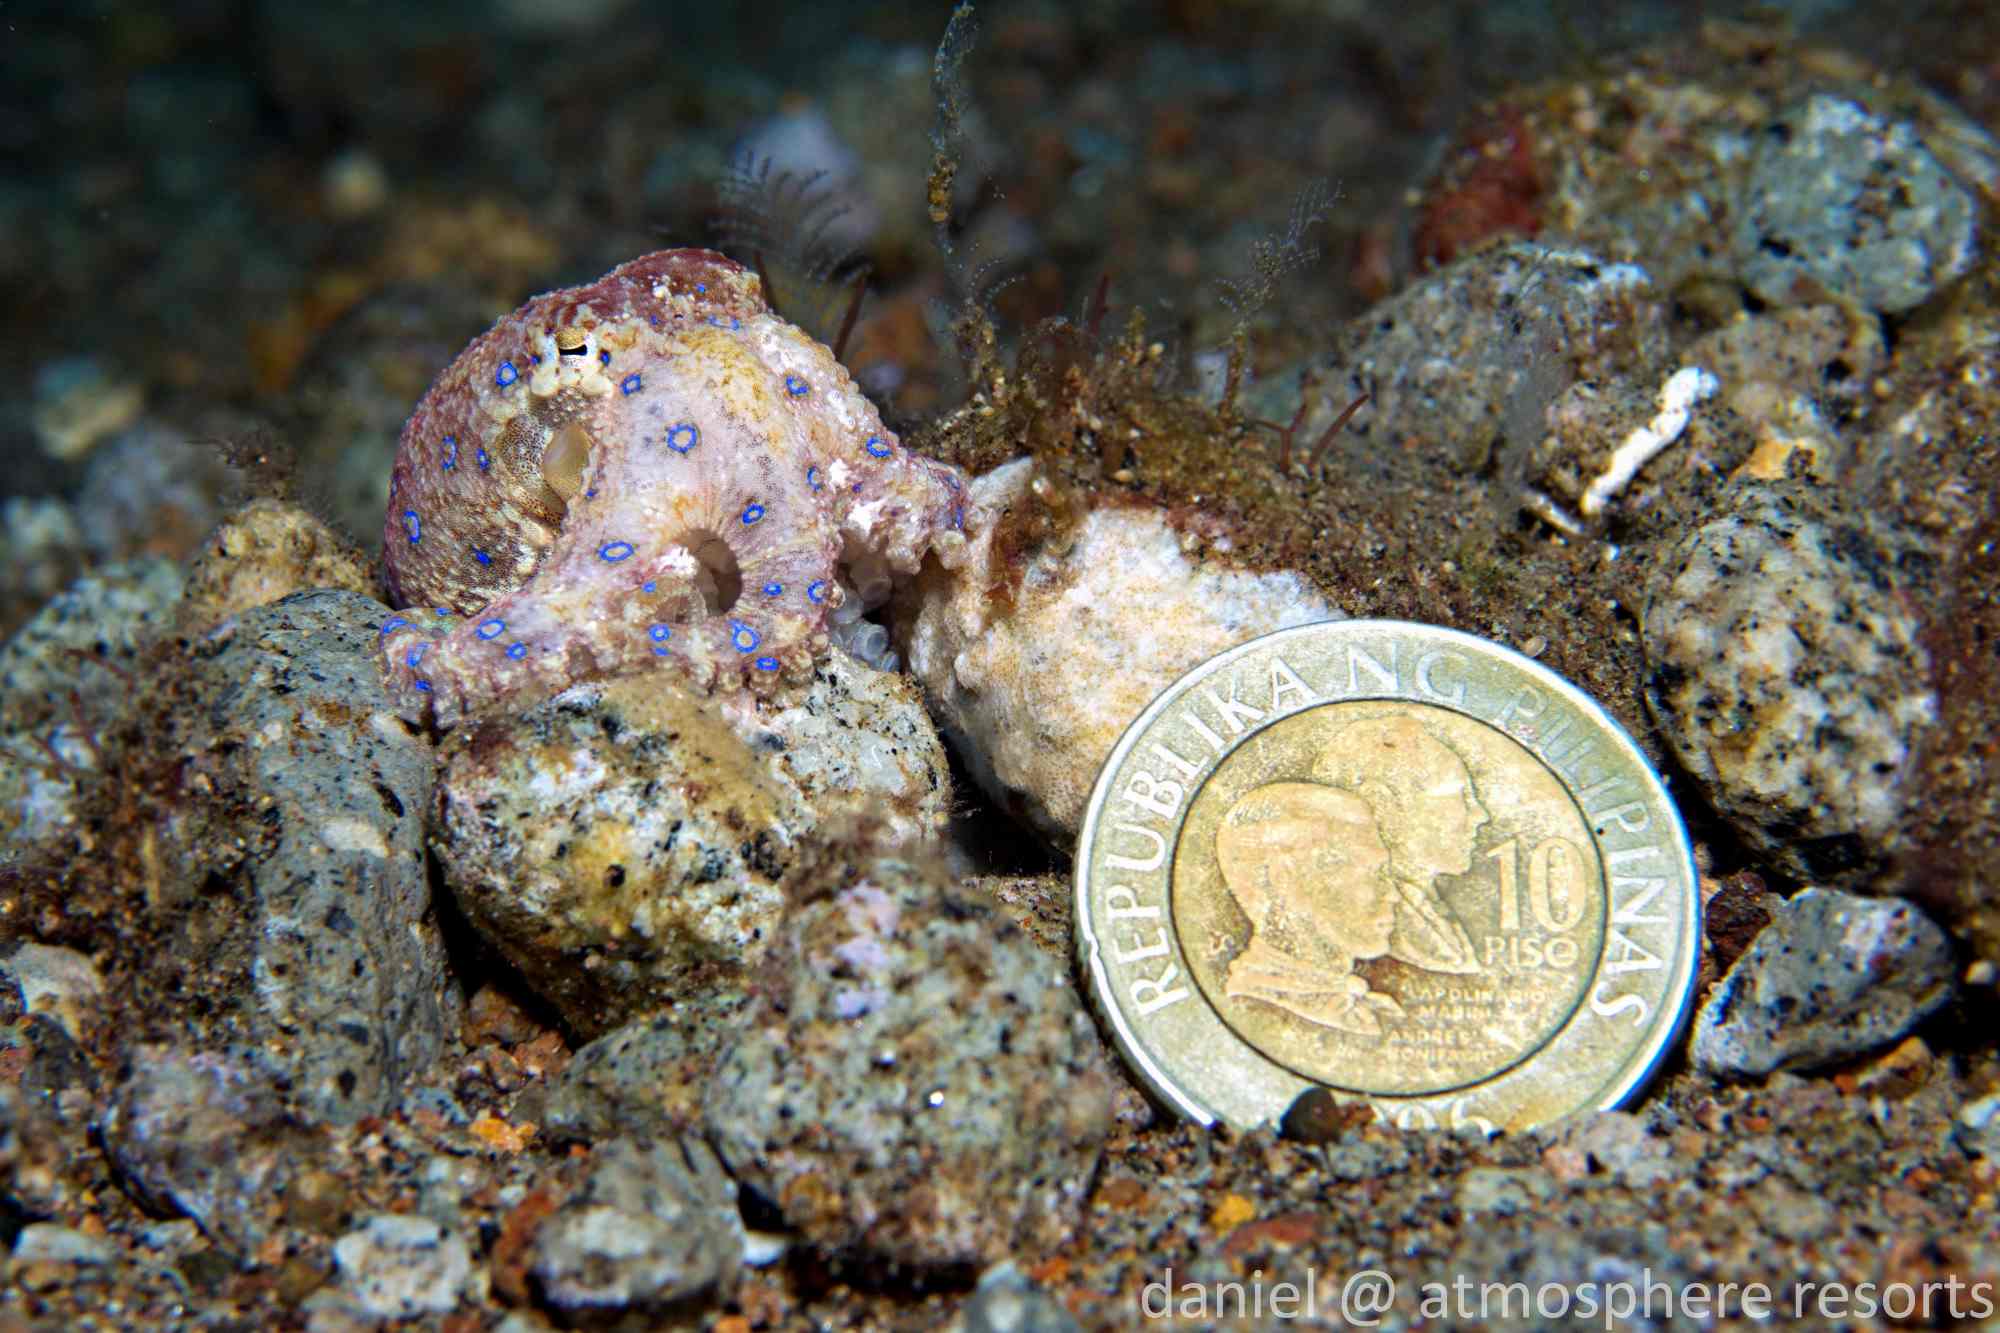 A picture of a juvenile blue-ringed octopus next to a 10 Philippine peso coin